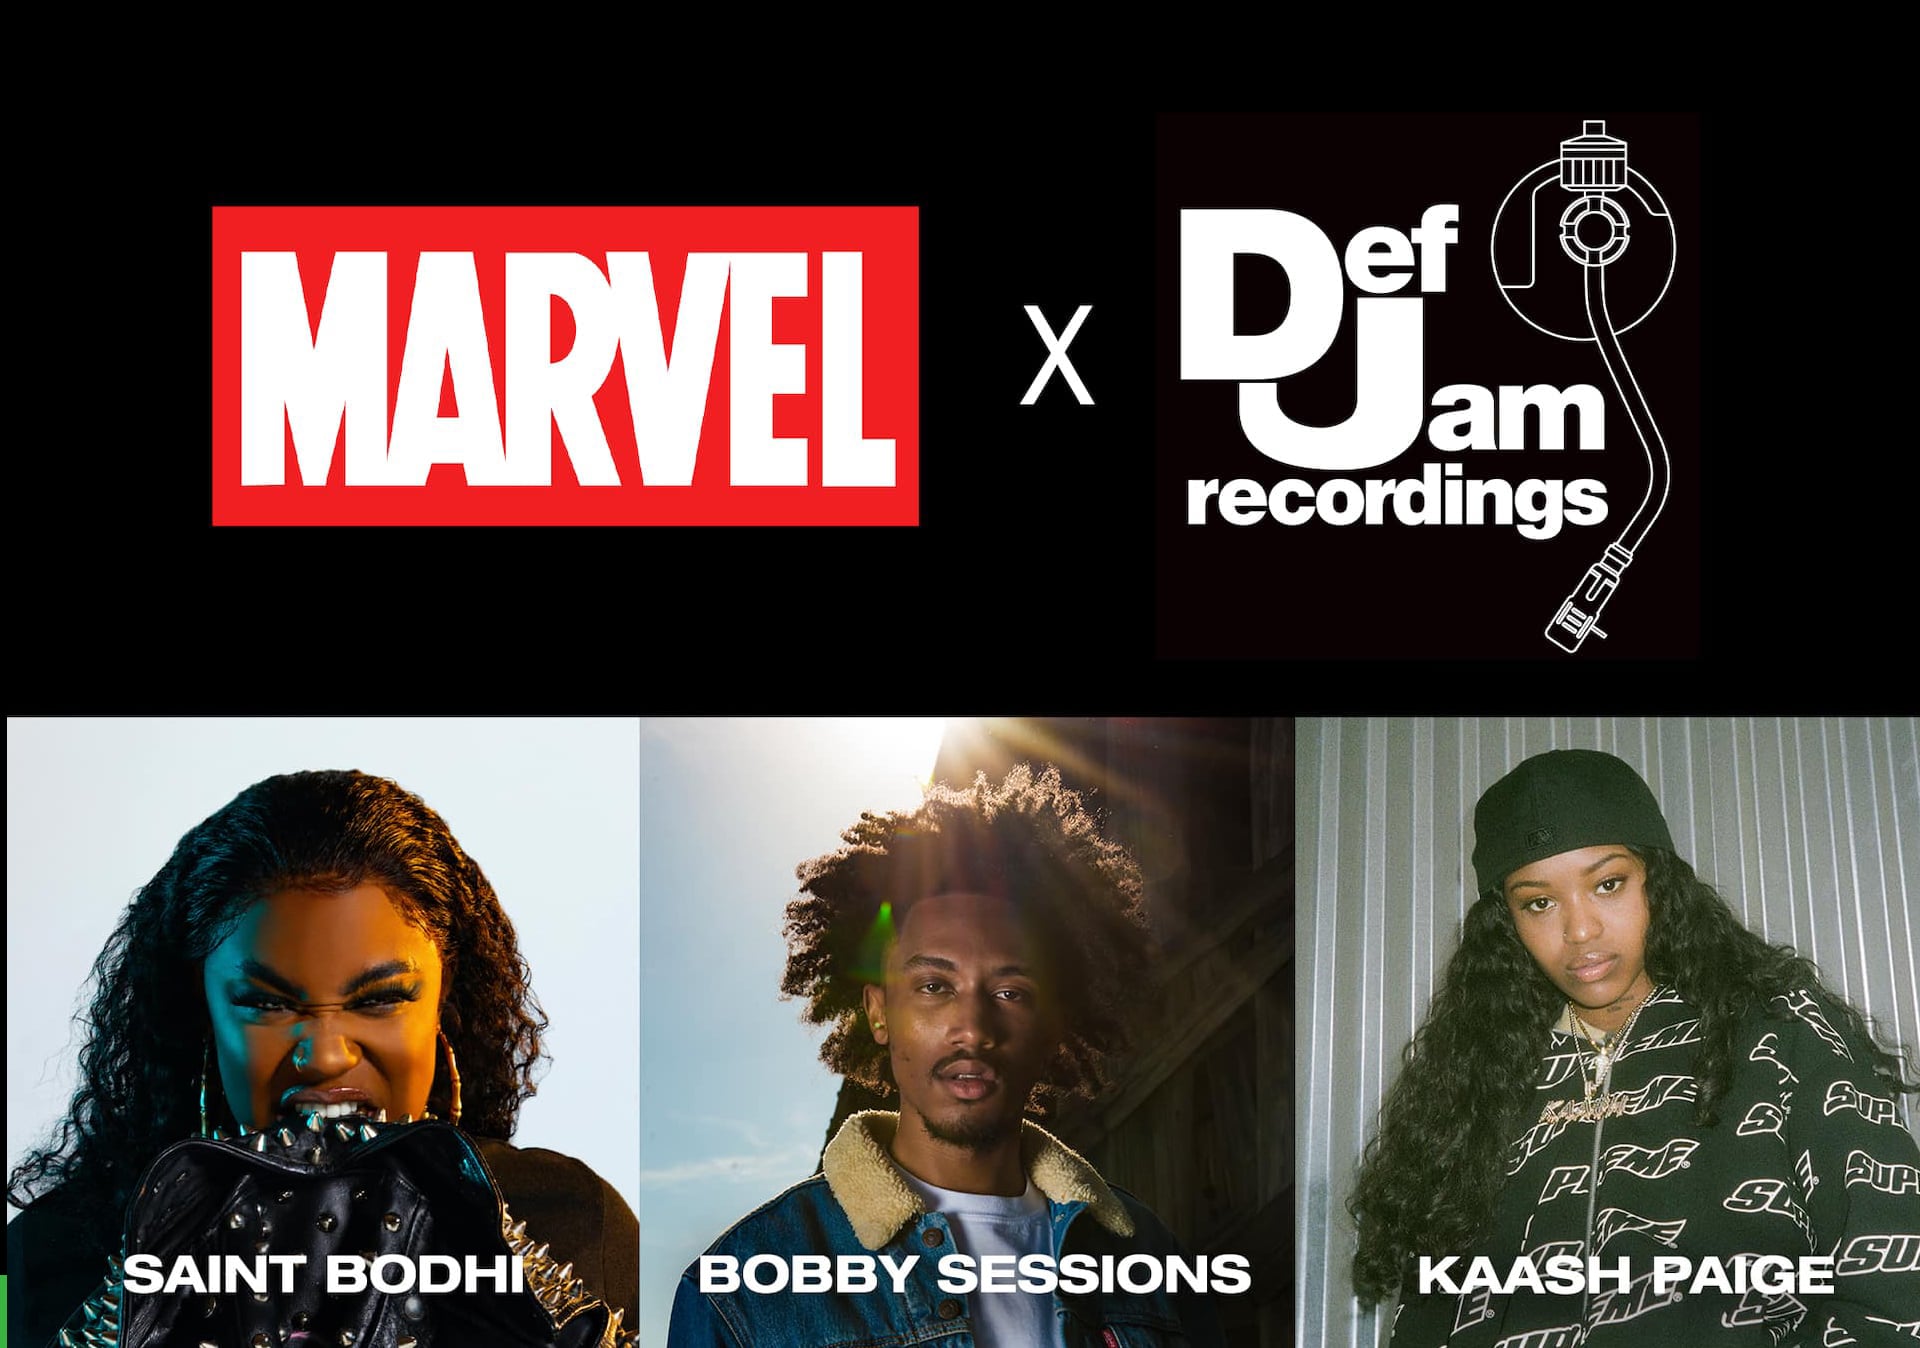 Def Jam Recordings and Marvel Comics team up for 'Black Panther' creator shorts